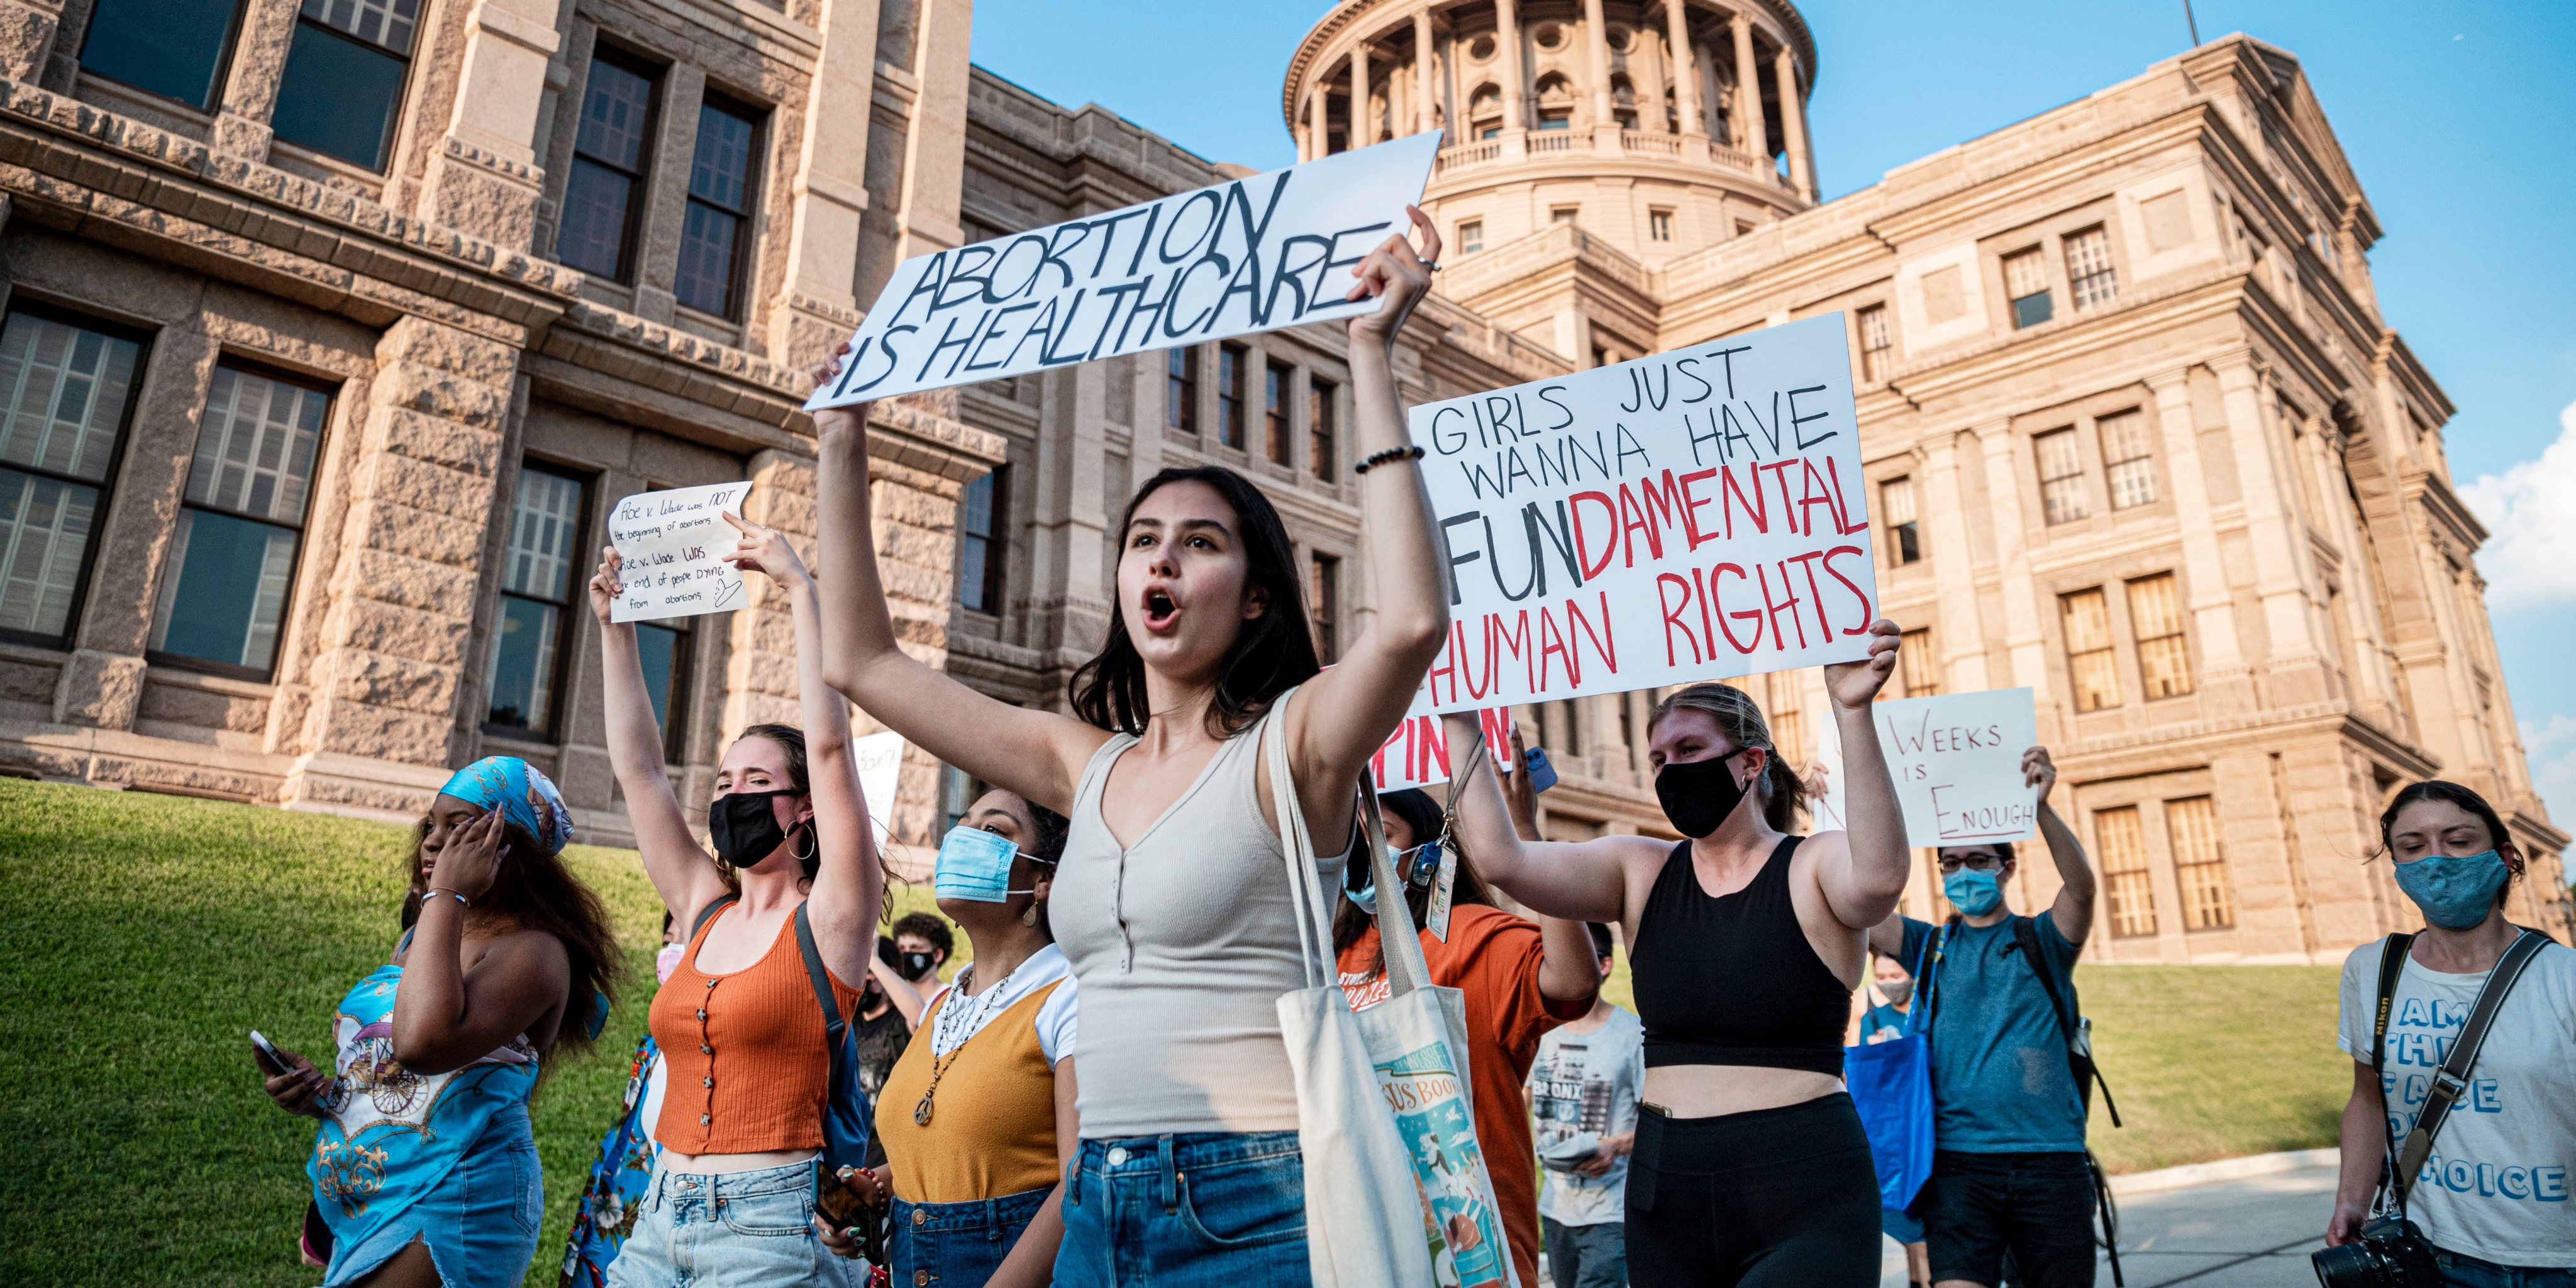 AUSTIN, TX - SEPT 1: Pro-choice protesters march outside the Te